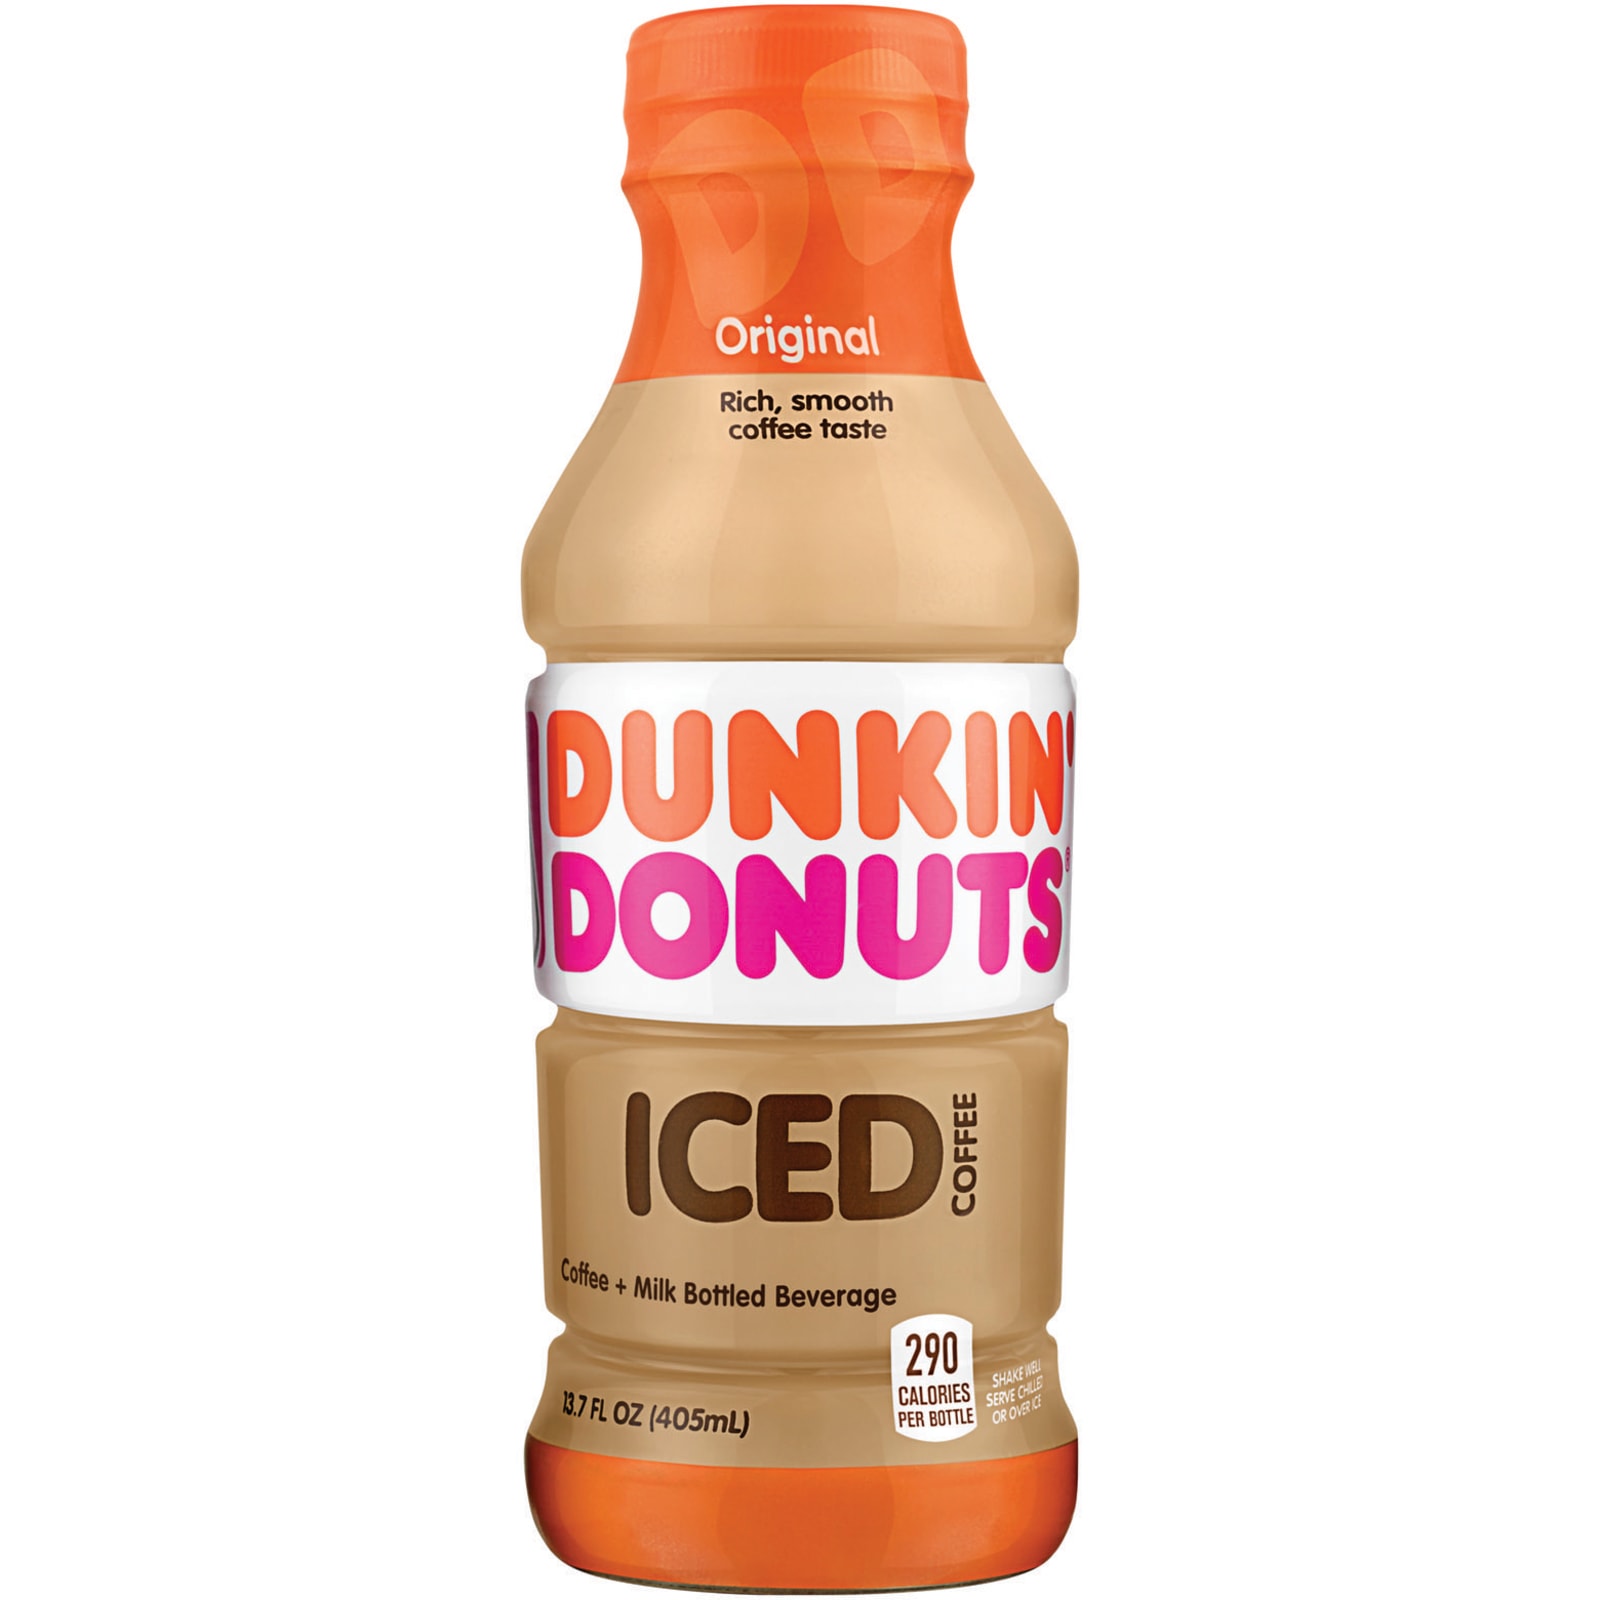 New Dunkin' Donuts Bottled Iced Coffee Now Arriving at Retailers